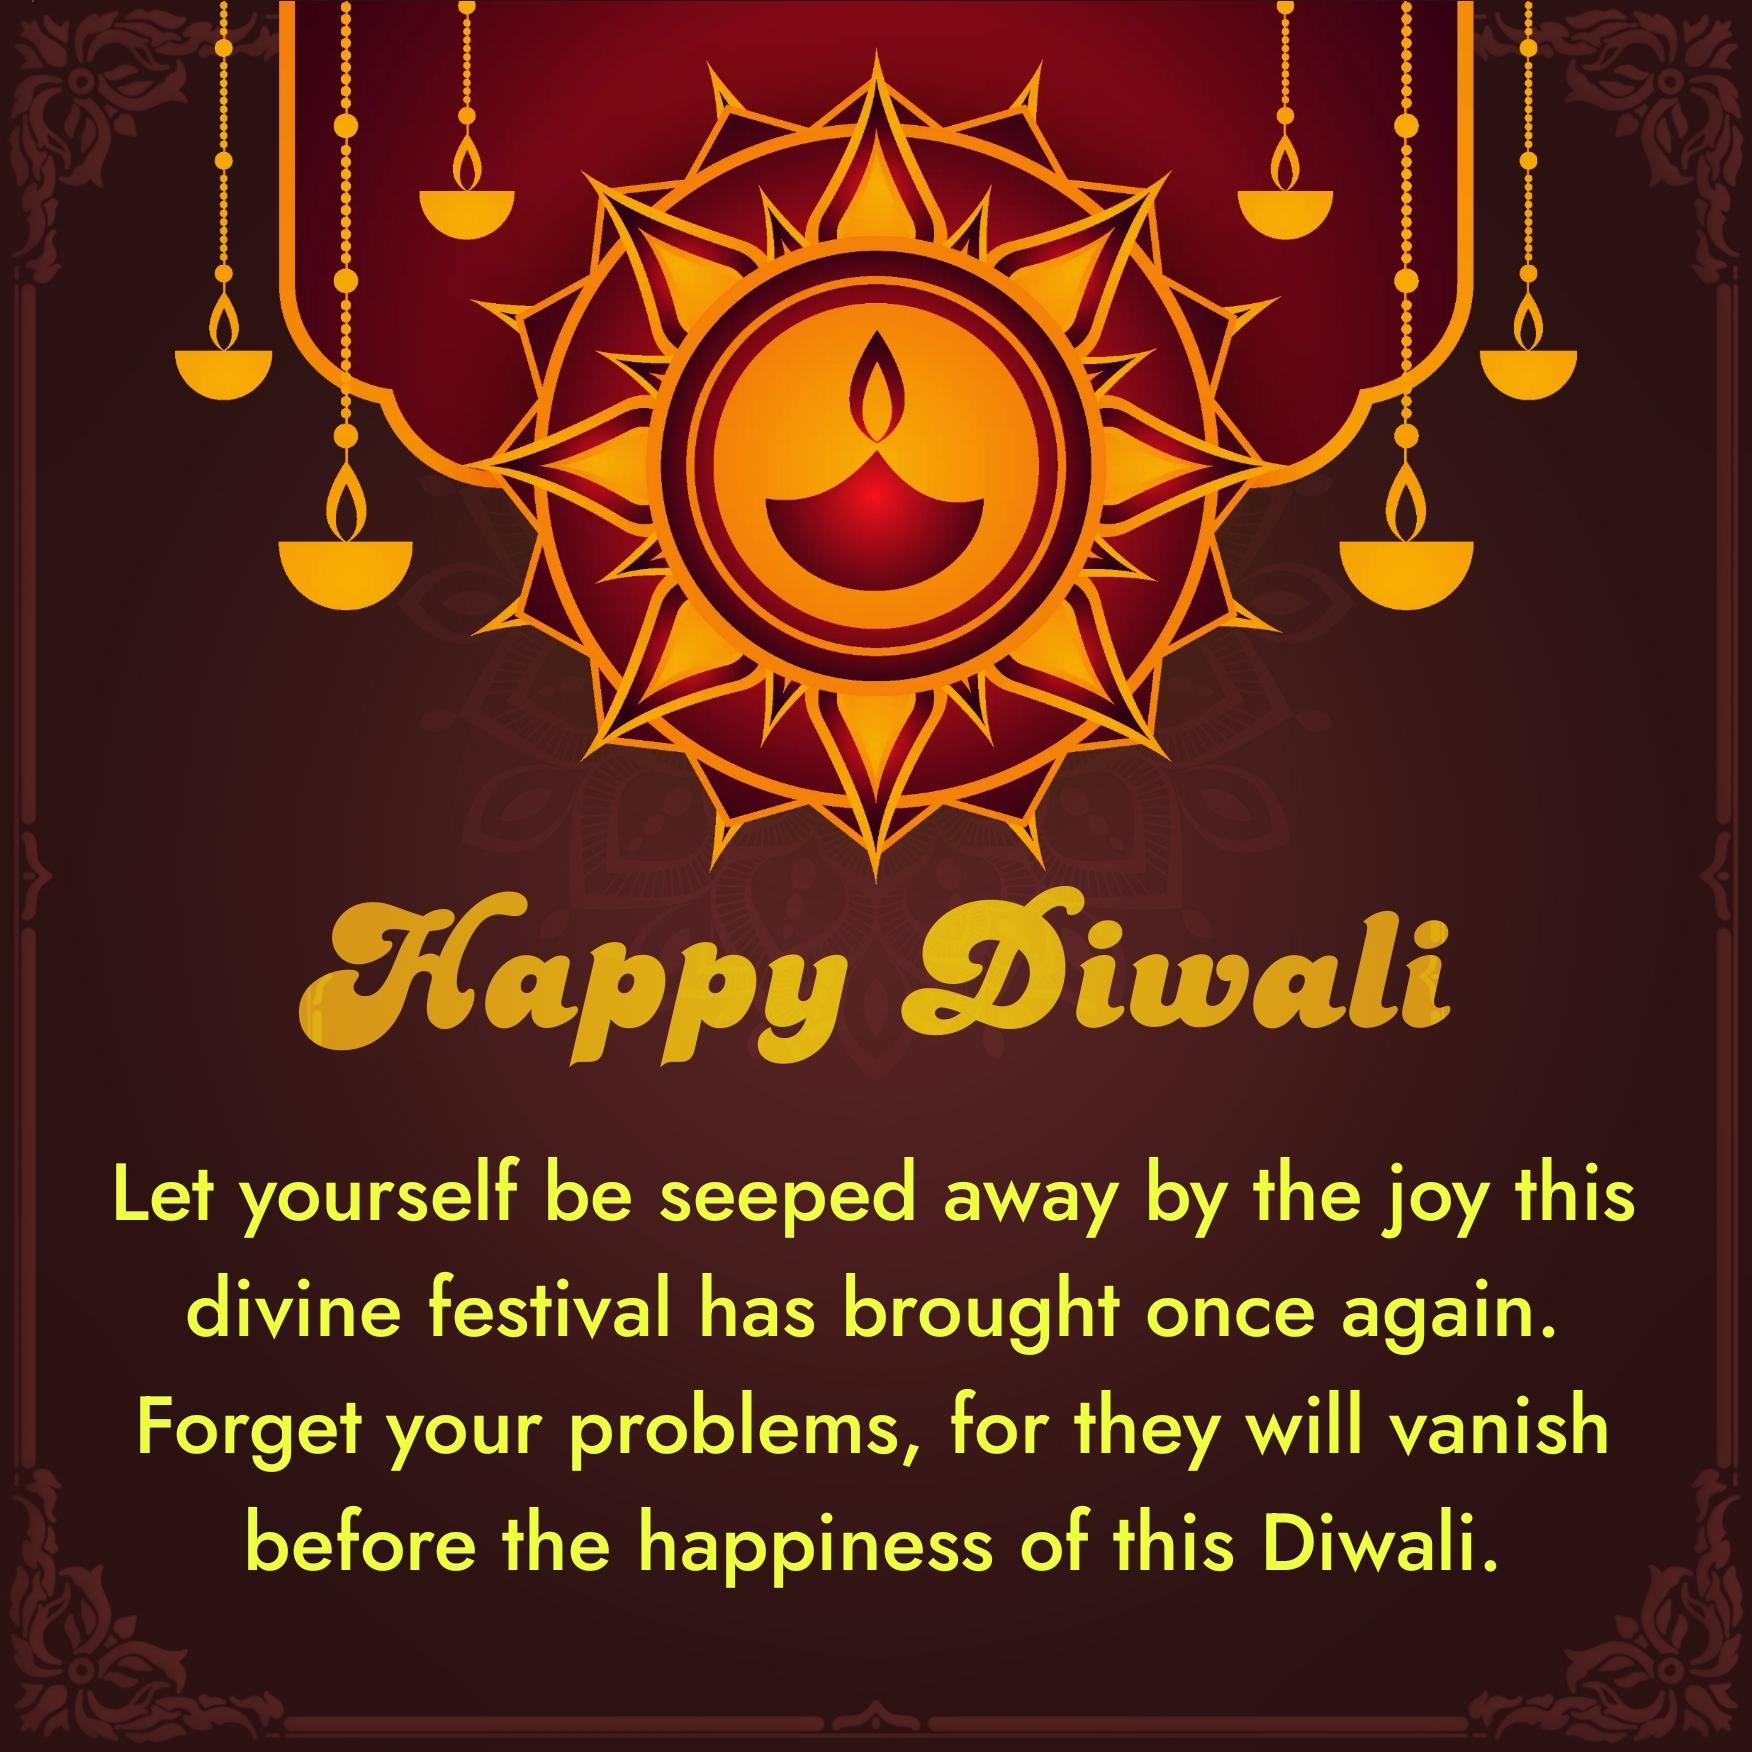 Let yourself be seeped away by the joy this divine festival